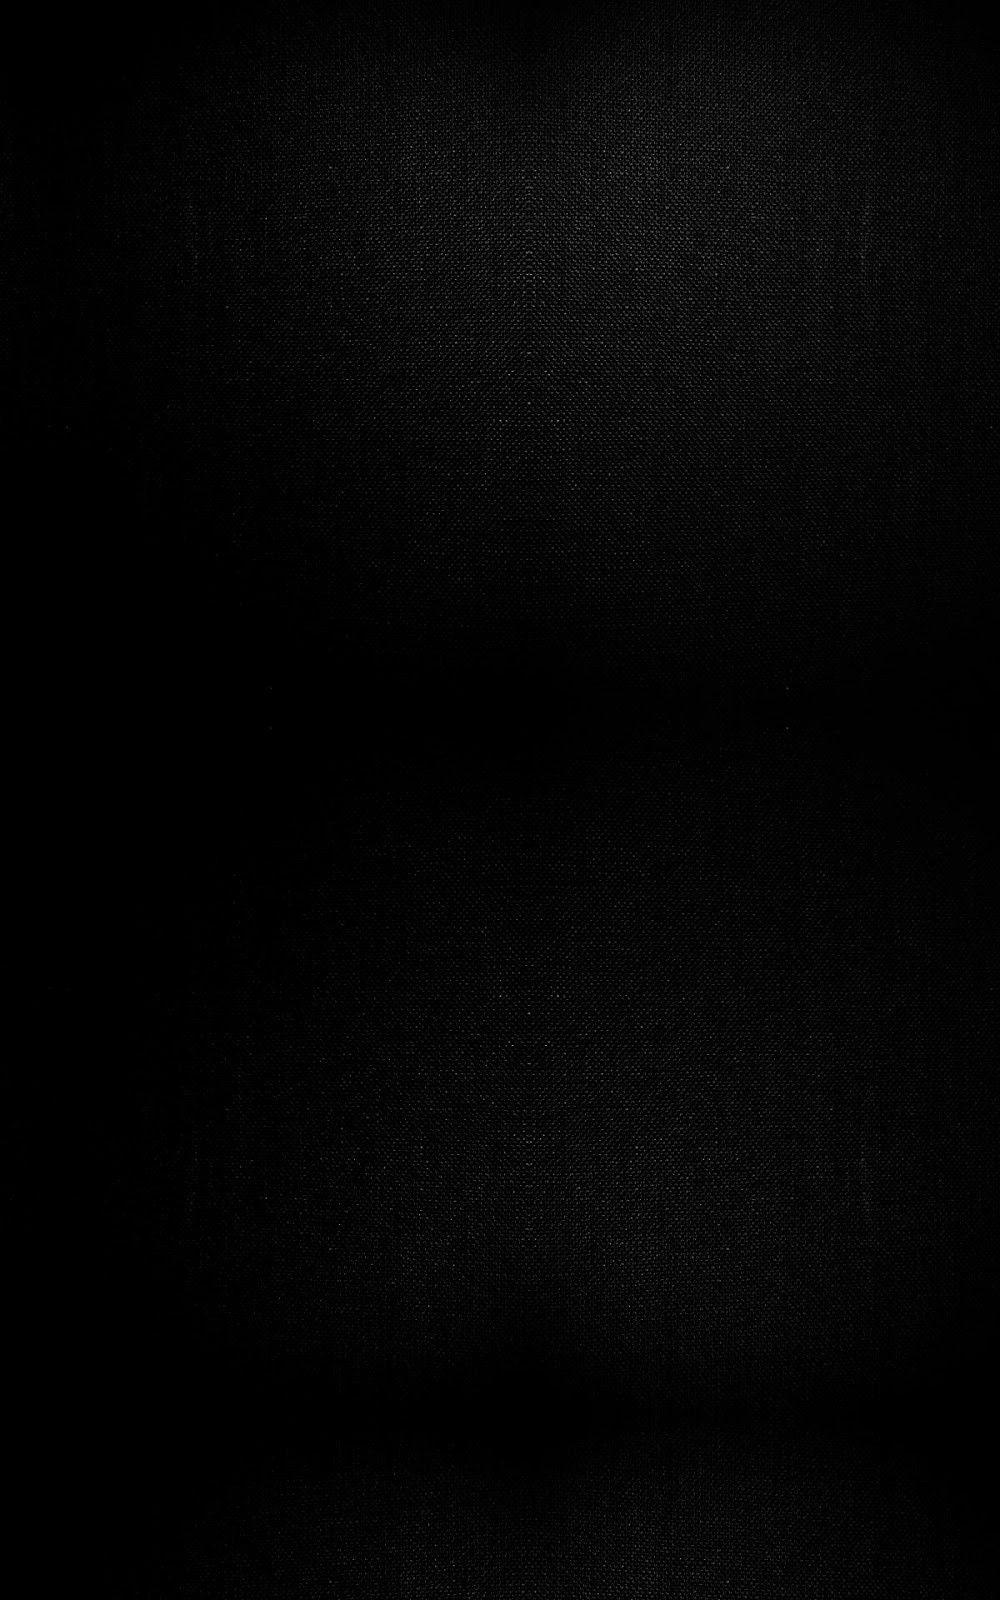 Solid Black Iphone Wallpapers Top Free Solid Black Iphone Backgrounds Wallpaperaccess